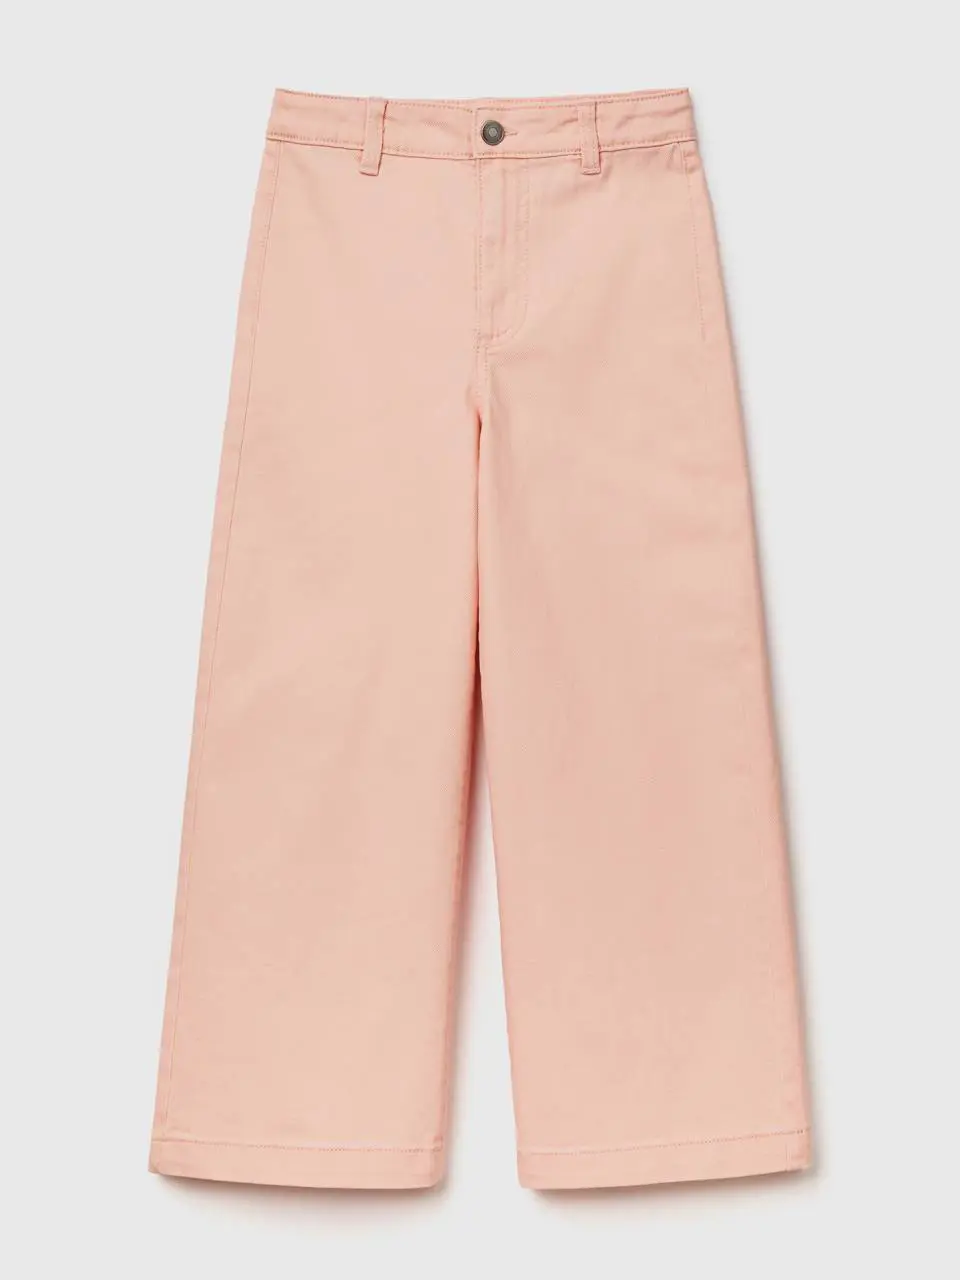 Benetton palazzo trousers in stretch cotton. 1